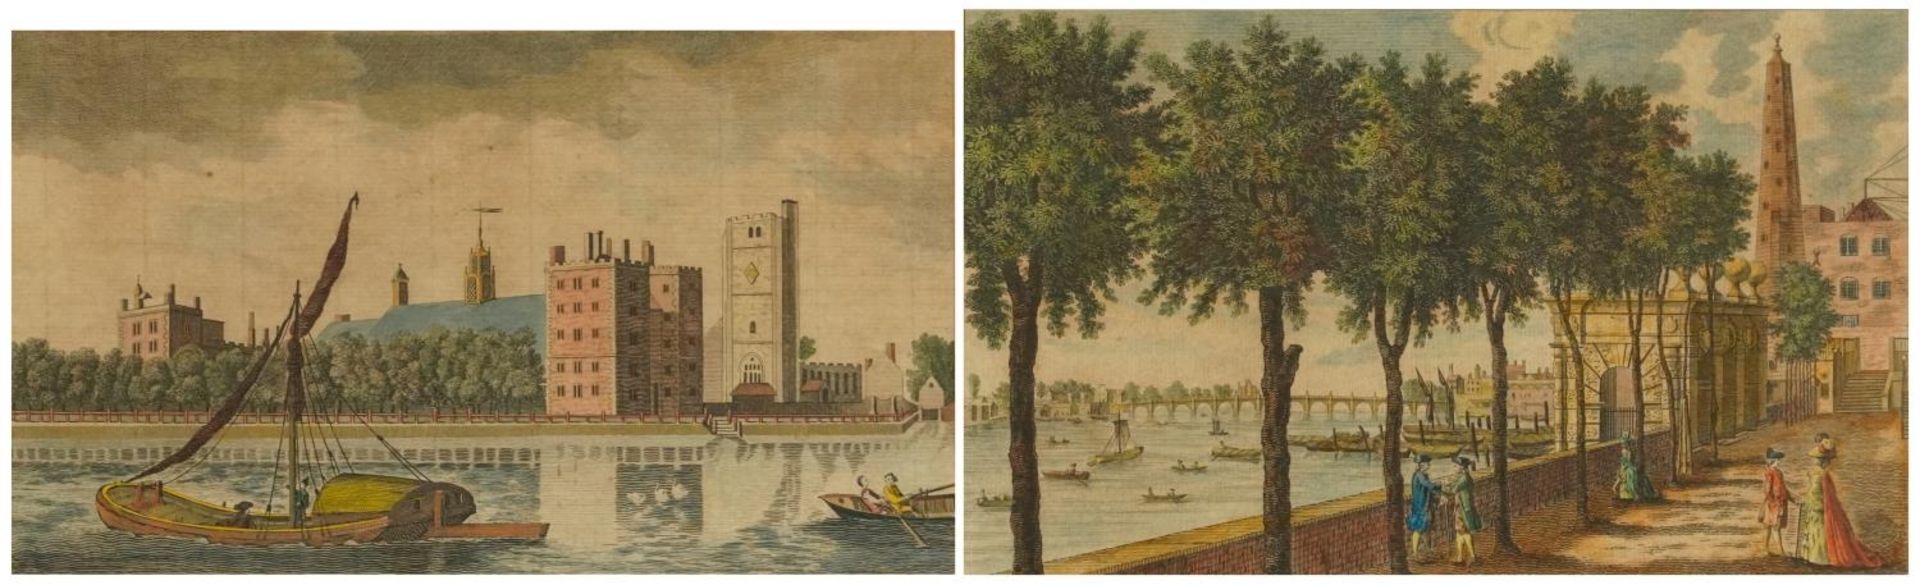 View of The Archbishop's Palace, Lambeth and Stairs at York Buildings, Westminster Bridge, pair of